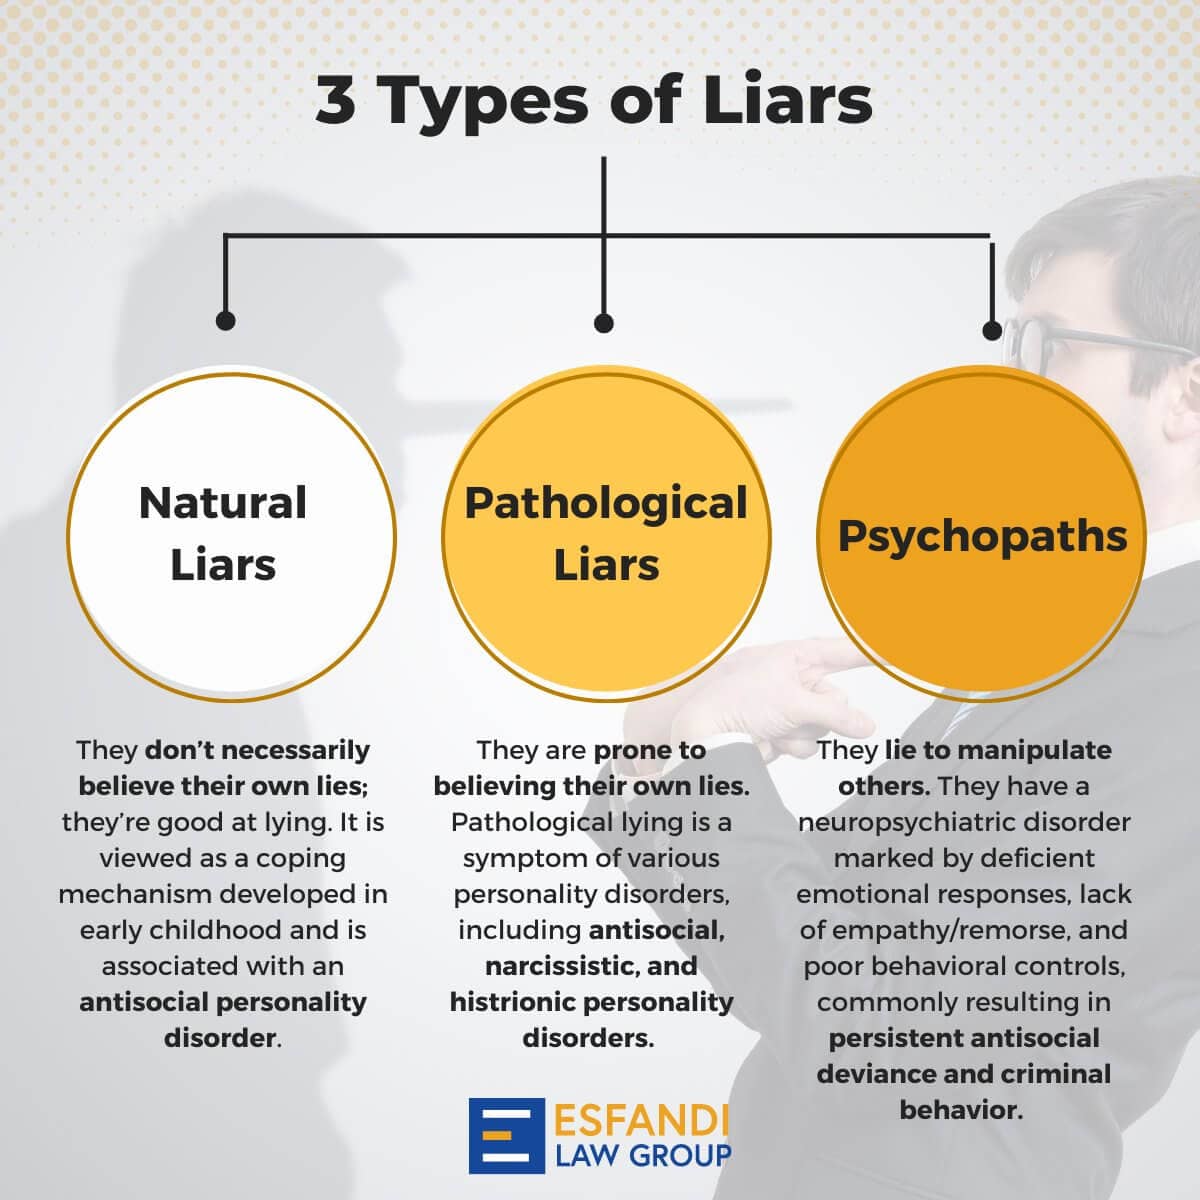 3 types of liars infographic